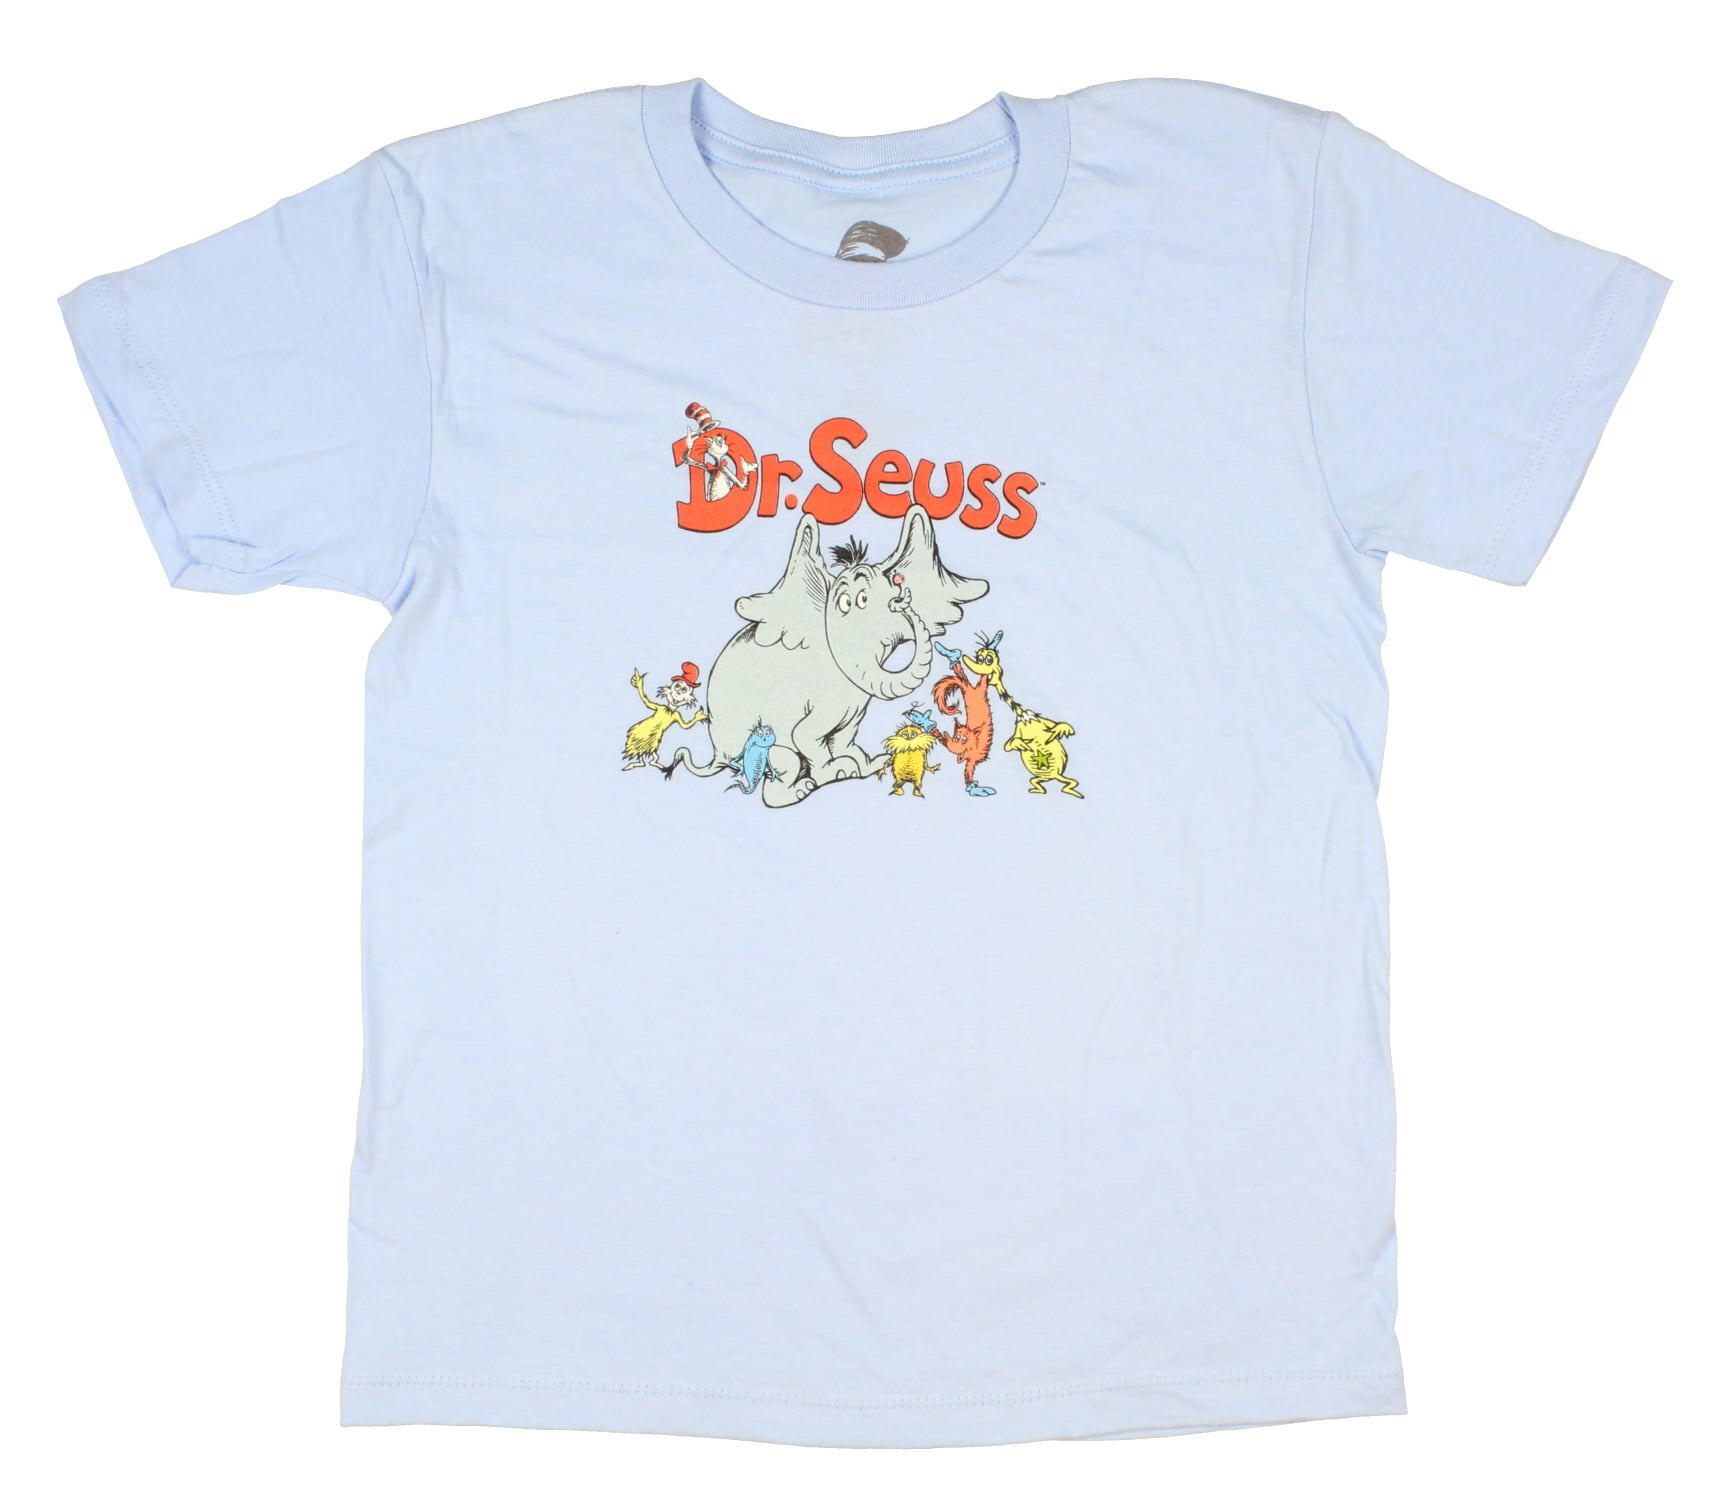 Dr Seuss Boys Youth Theres A Wocket in My Pocket White Crew Neck T-Shirt 